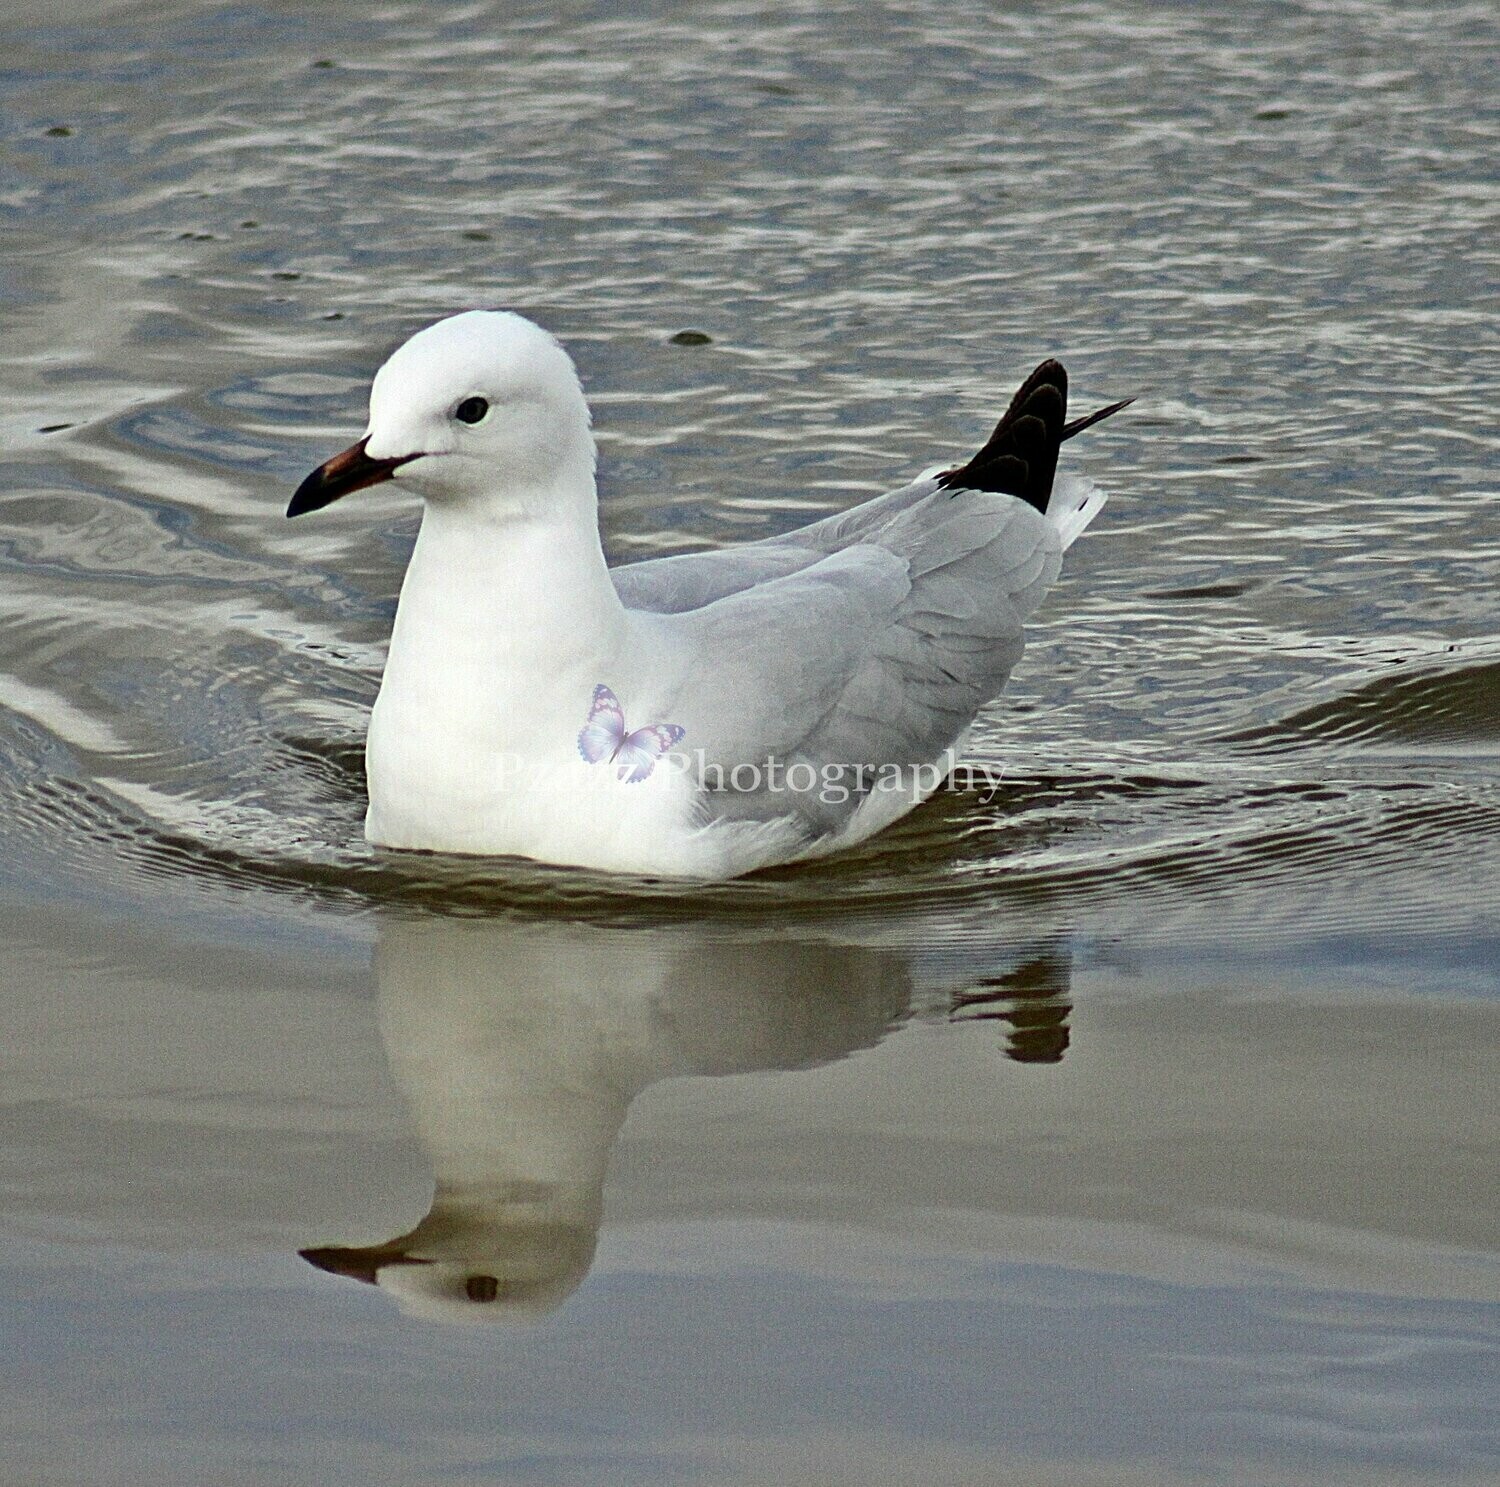 Pzazz Photography - Seagull - Specially ordered for you. Delivery is approximately 4 - 6 weeks.